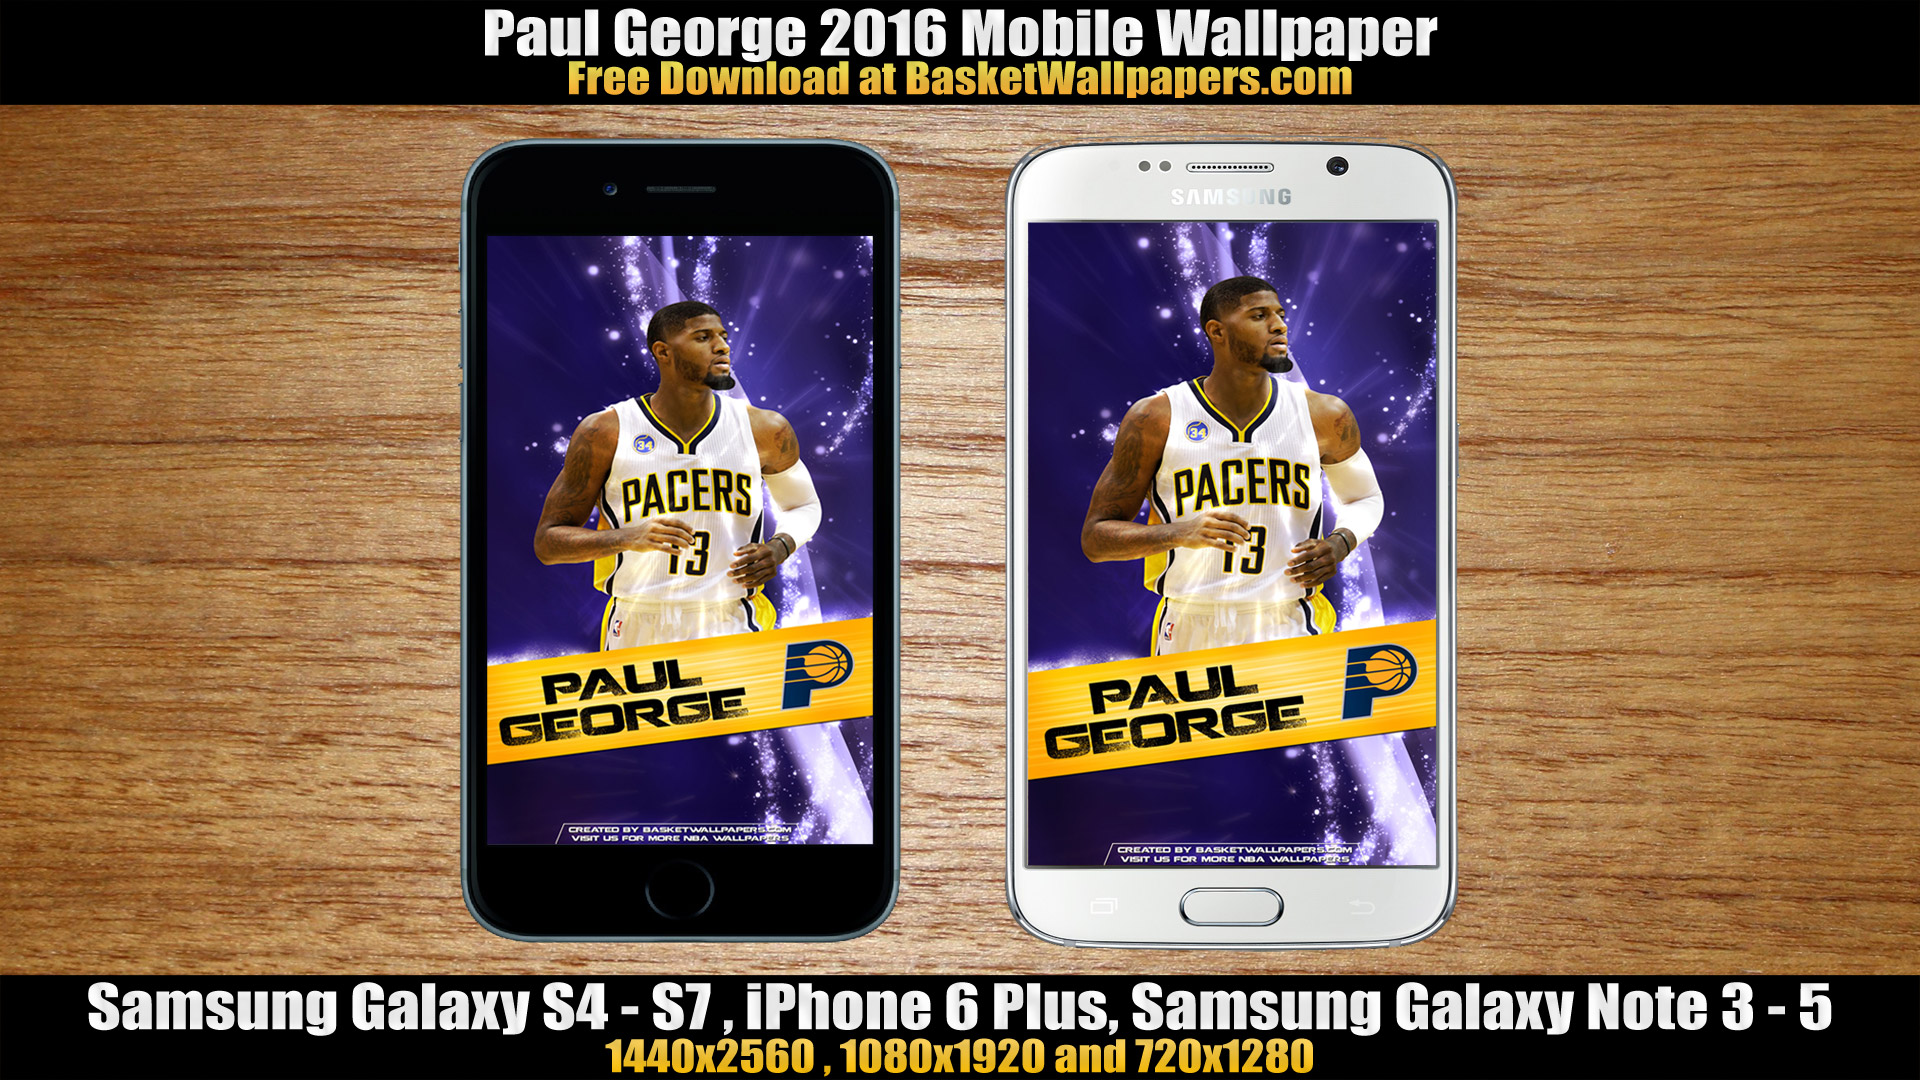 Paul George Indiana Pacers 2016 Mobile Wallpaper Basketball